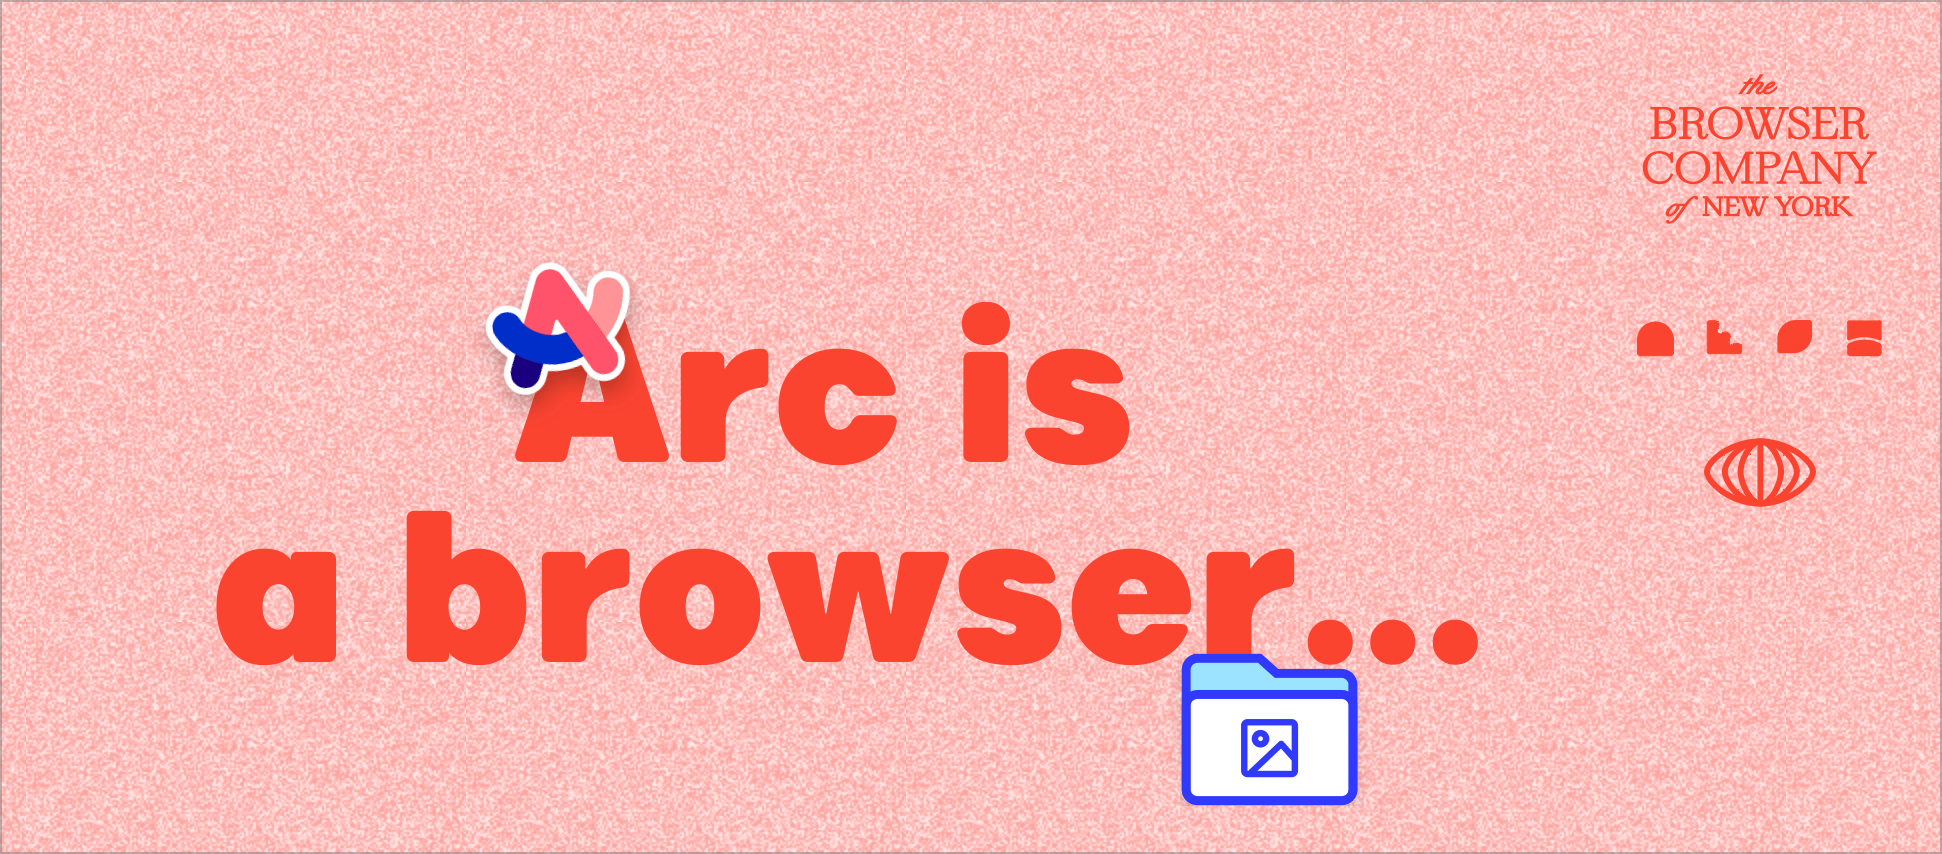 Why am I not yet using the Arc Browser?